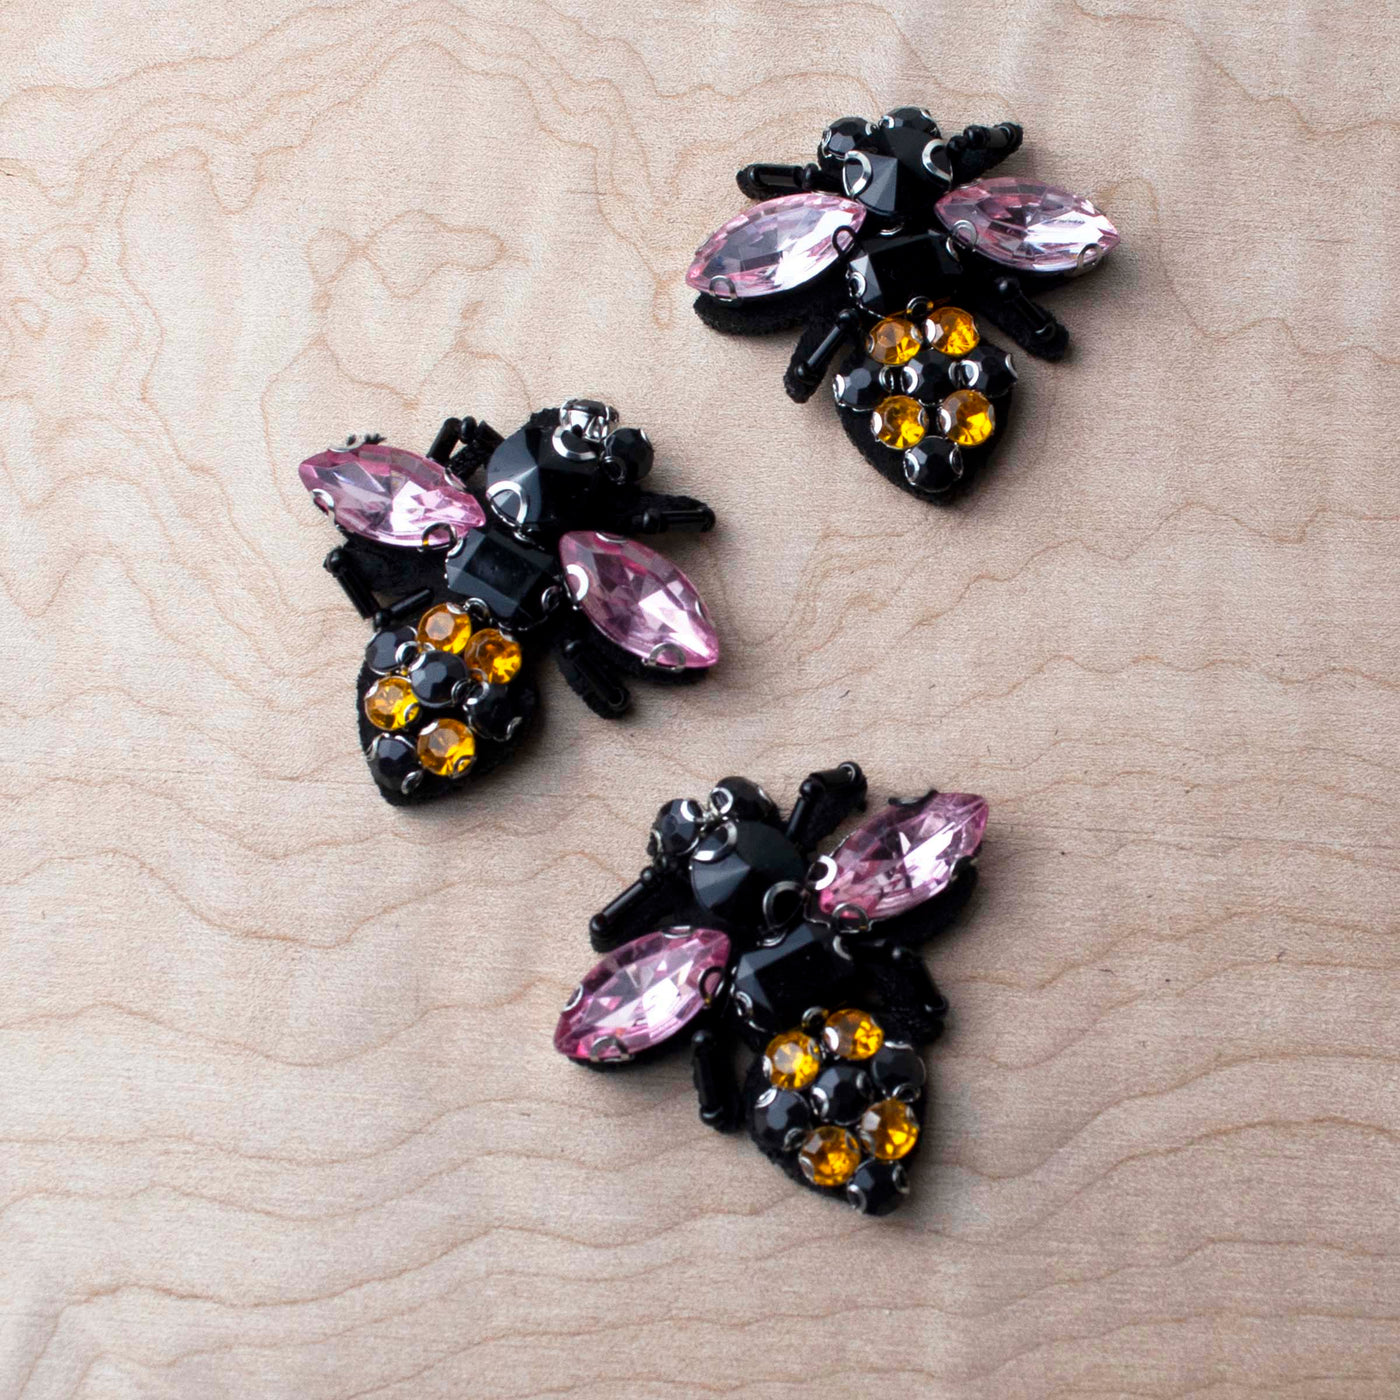 Pink Wing Bumble Bee Appliqué